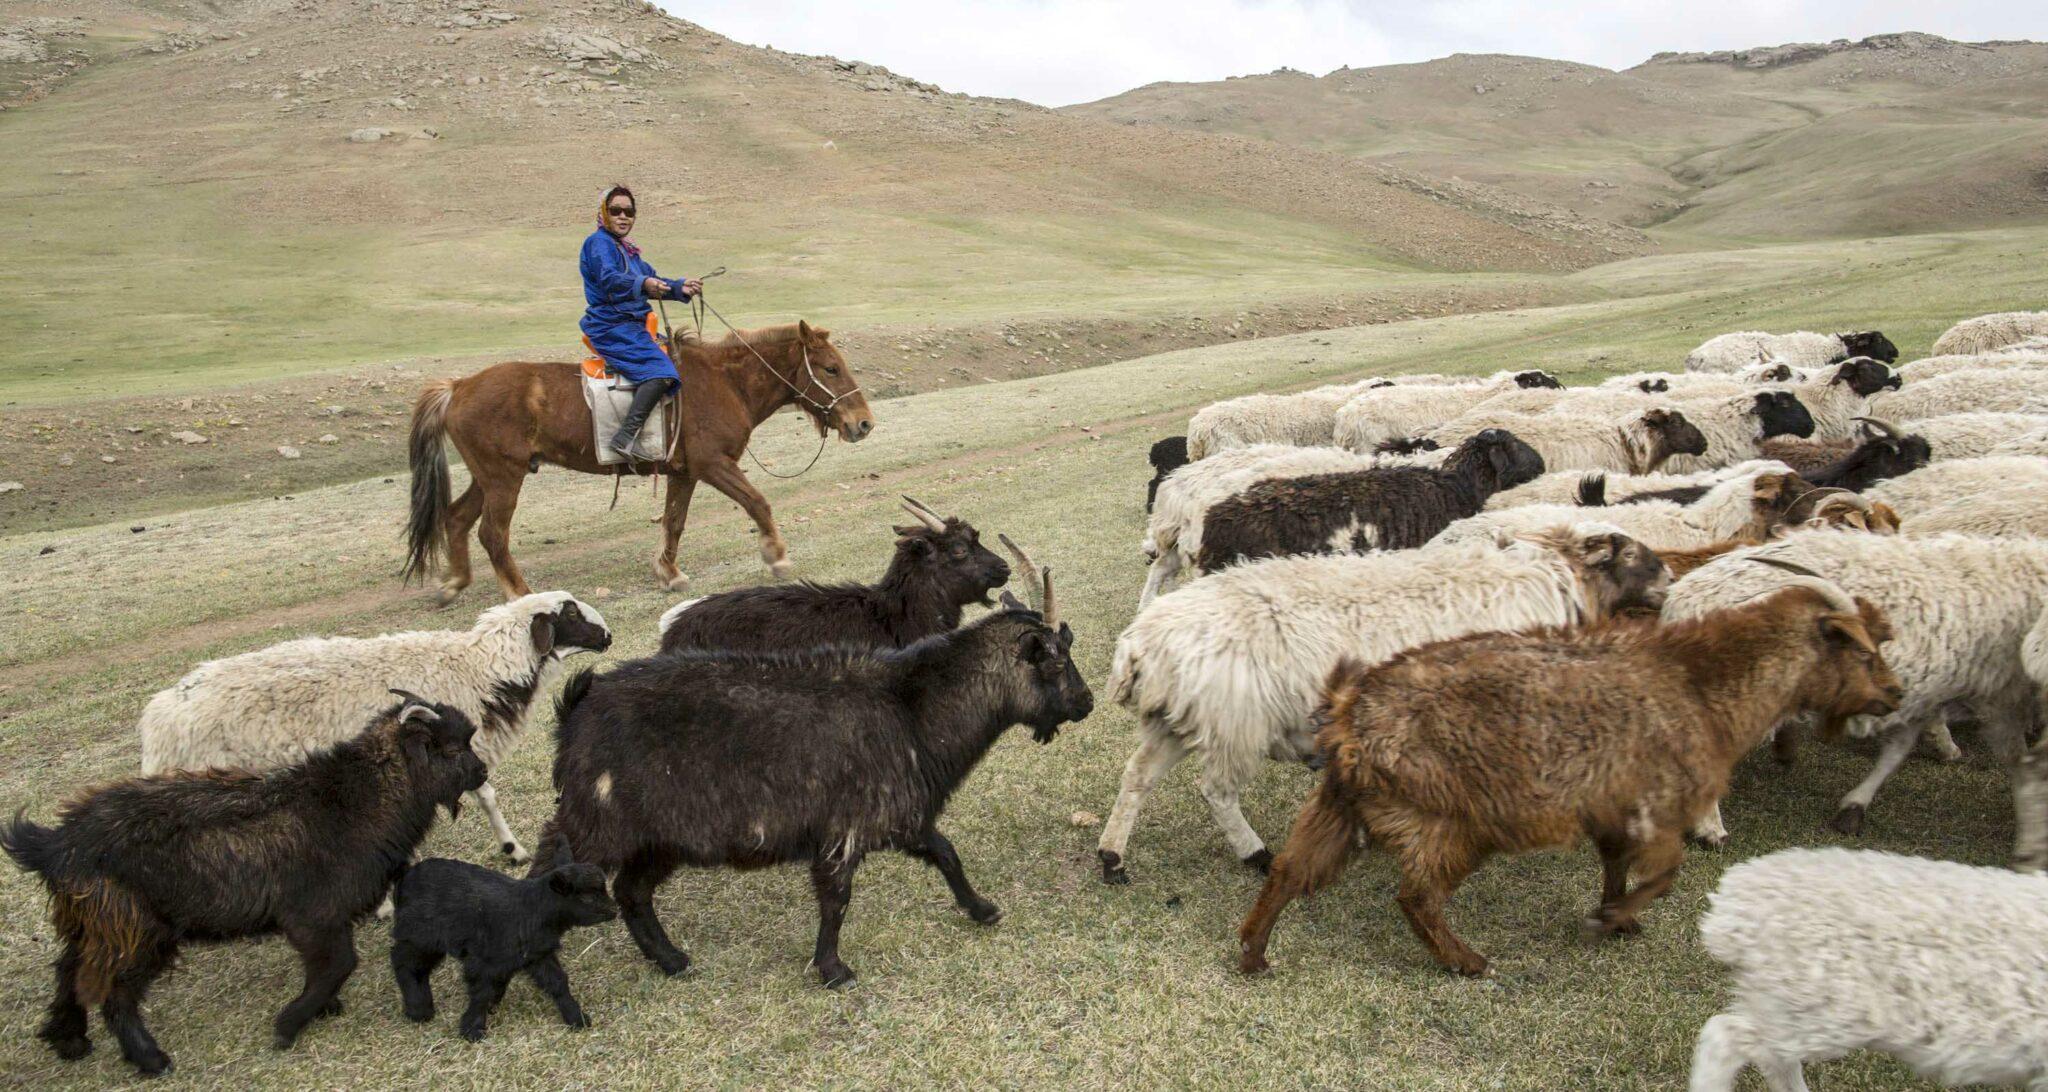 A nomadic woman herding goats in Mongolia. The Mongolian National Statistics Office, supported by Woman Count, has gathered data to understand the specific needs and challenges faced by women herders due to changing environmental factors. ©FAO/K.Purevraqchaa